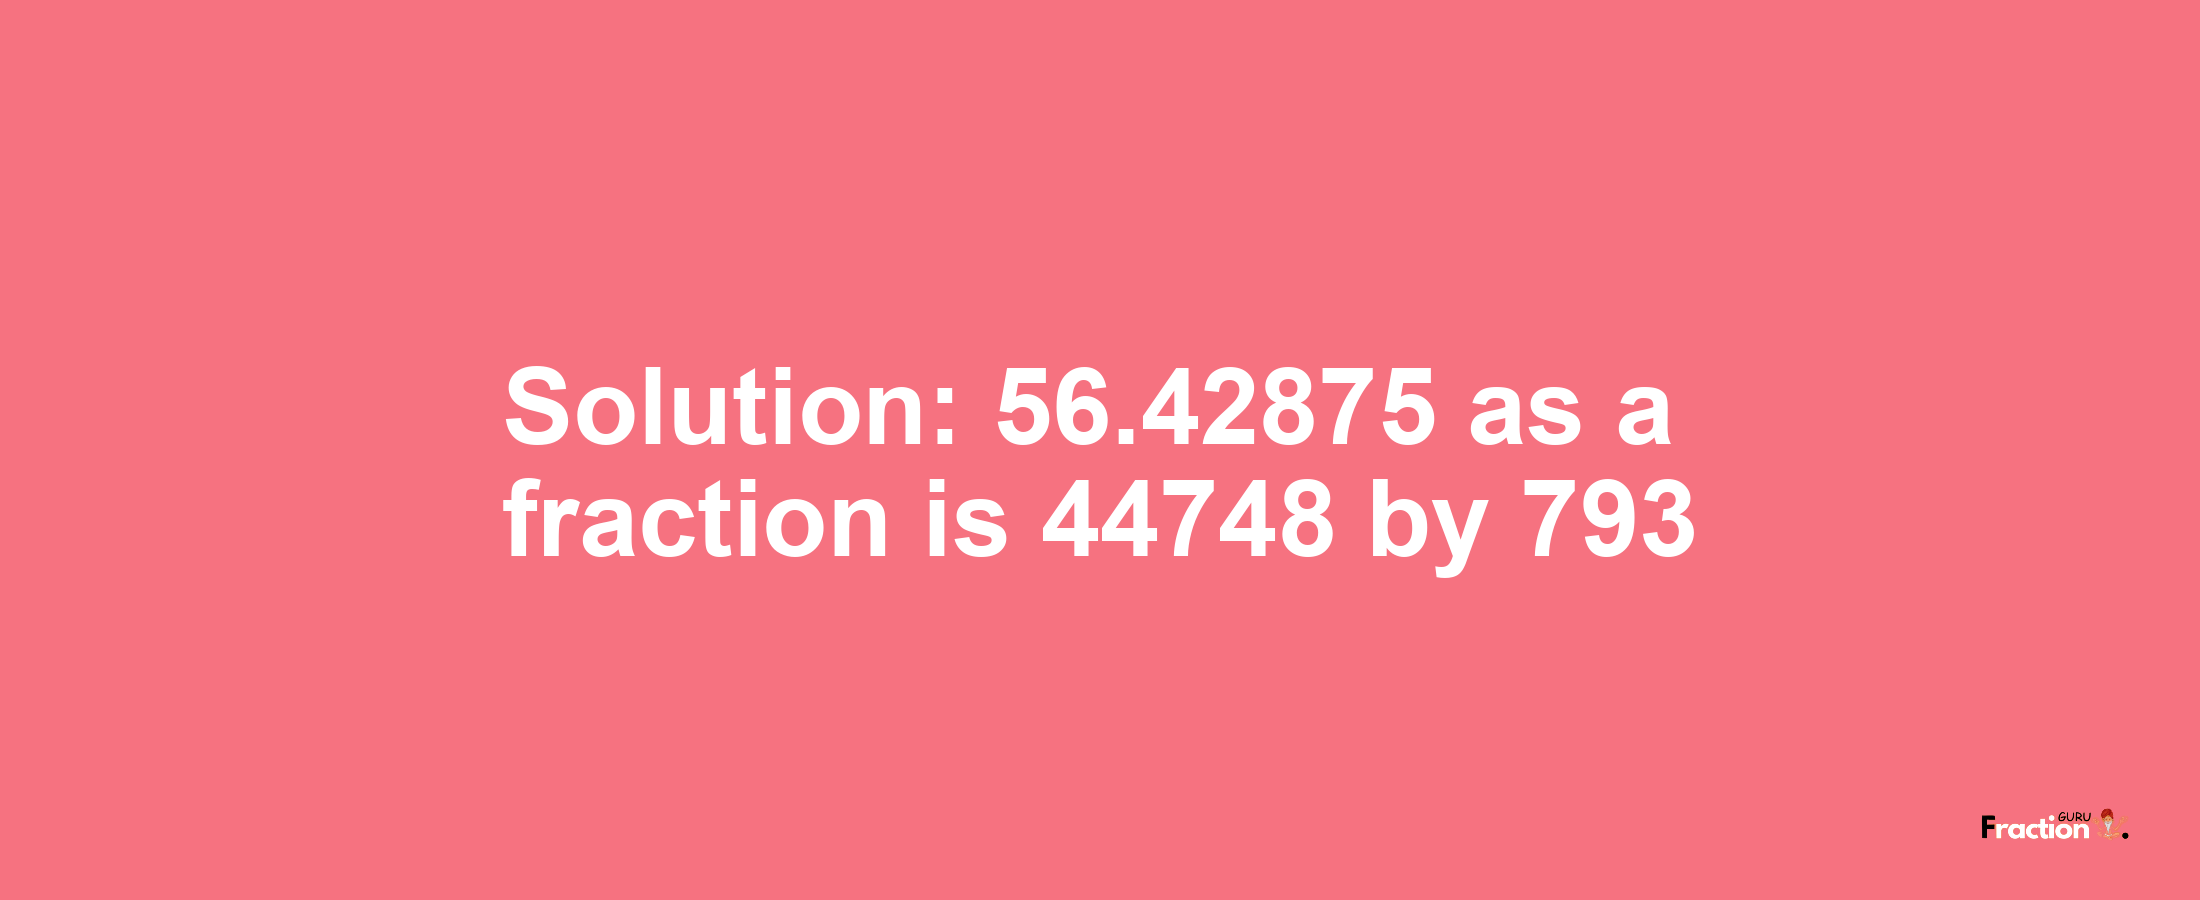 Solution:56.42875 as a fraction is 44748/793